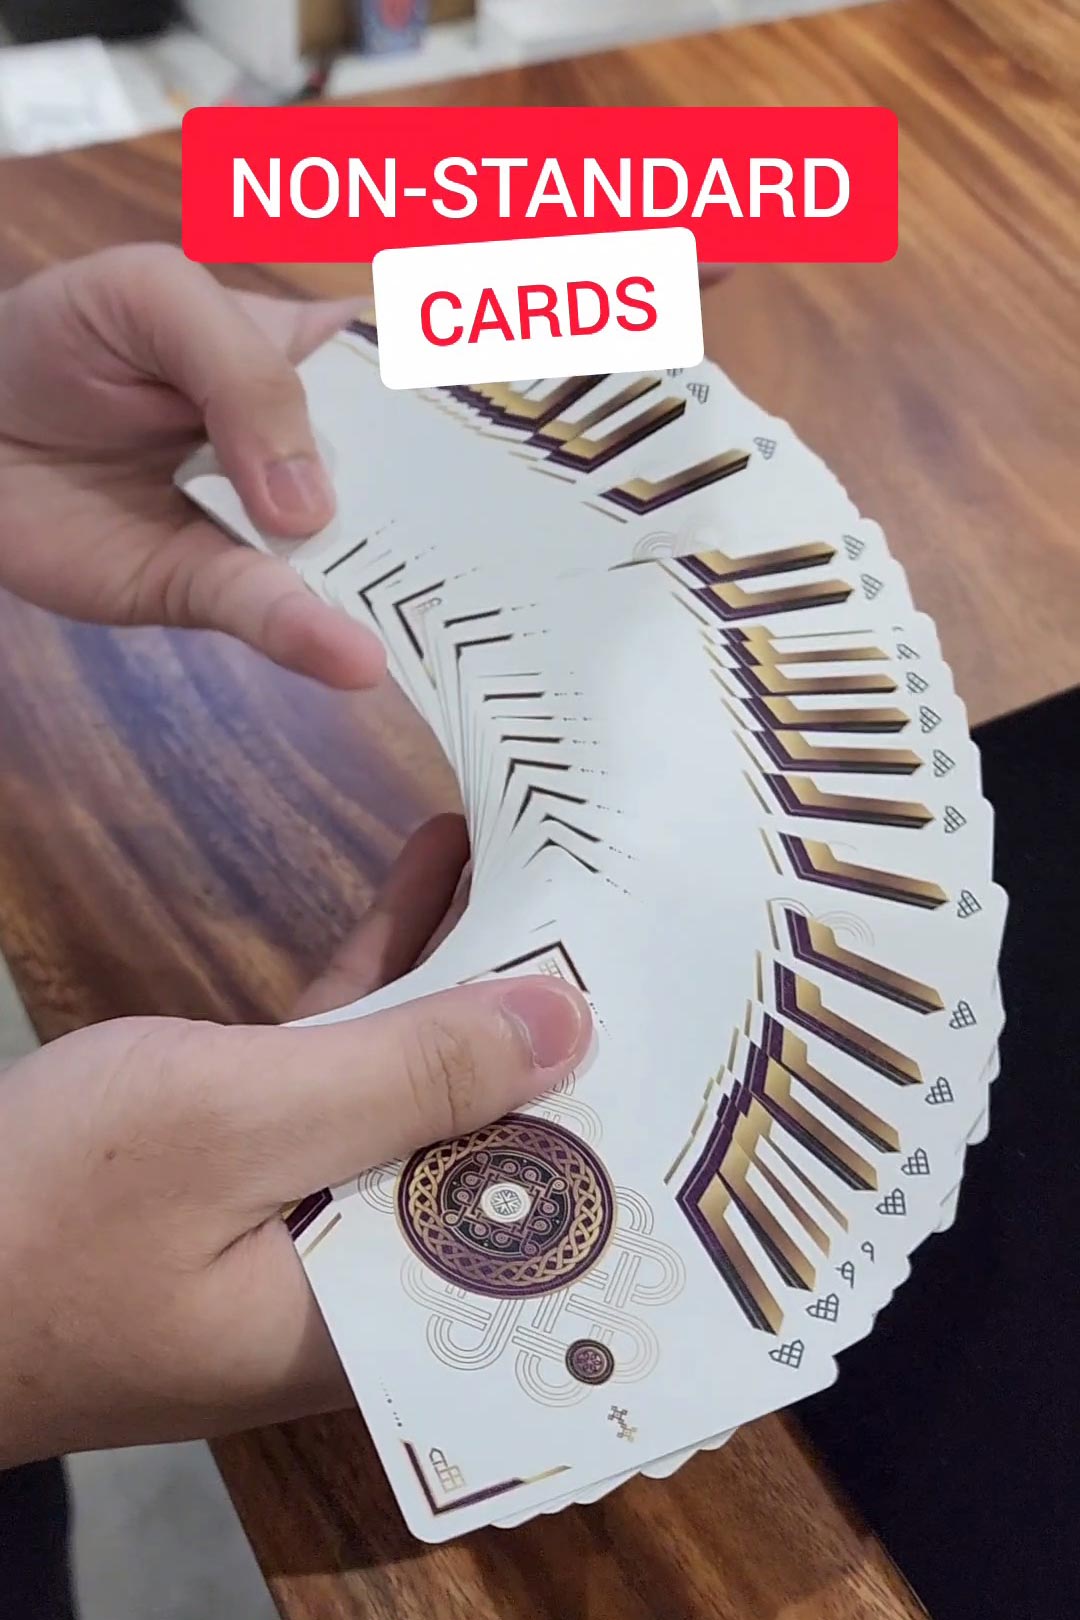 What are non-standard deck of playing cards?